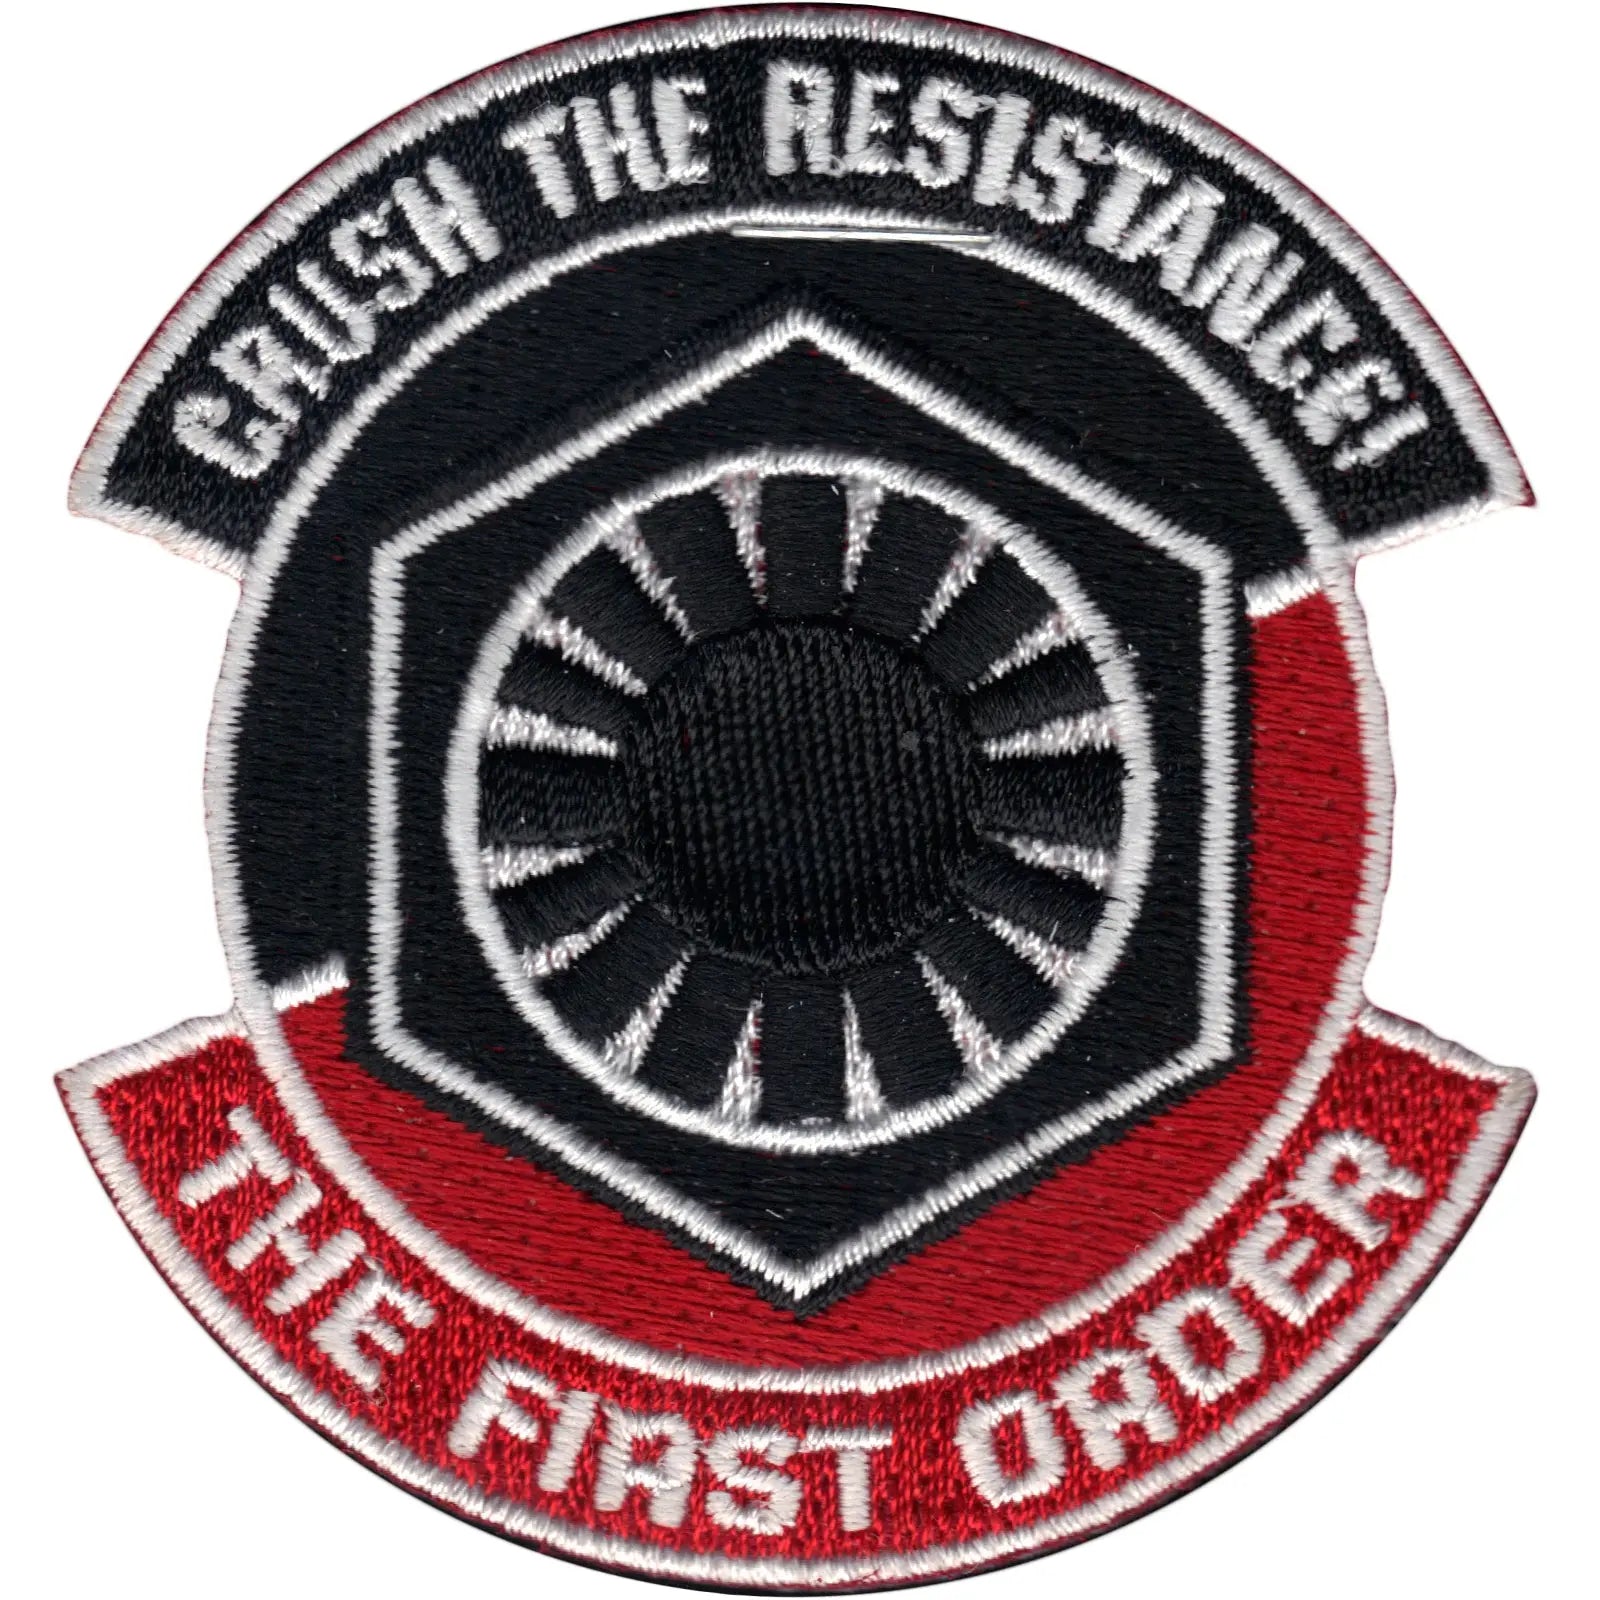 Star Wars 'Crush The Resistance' Iron On Patch 